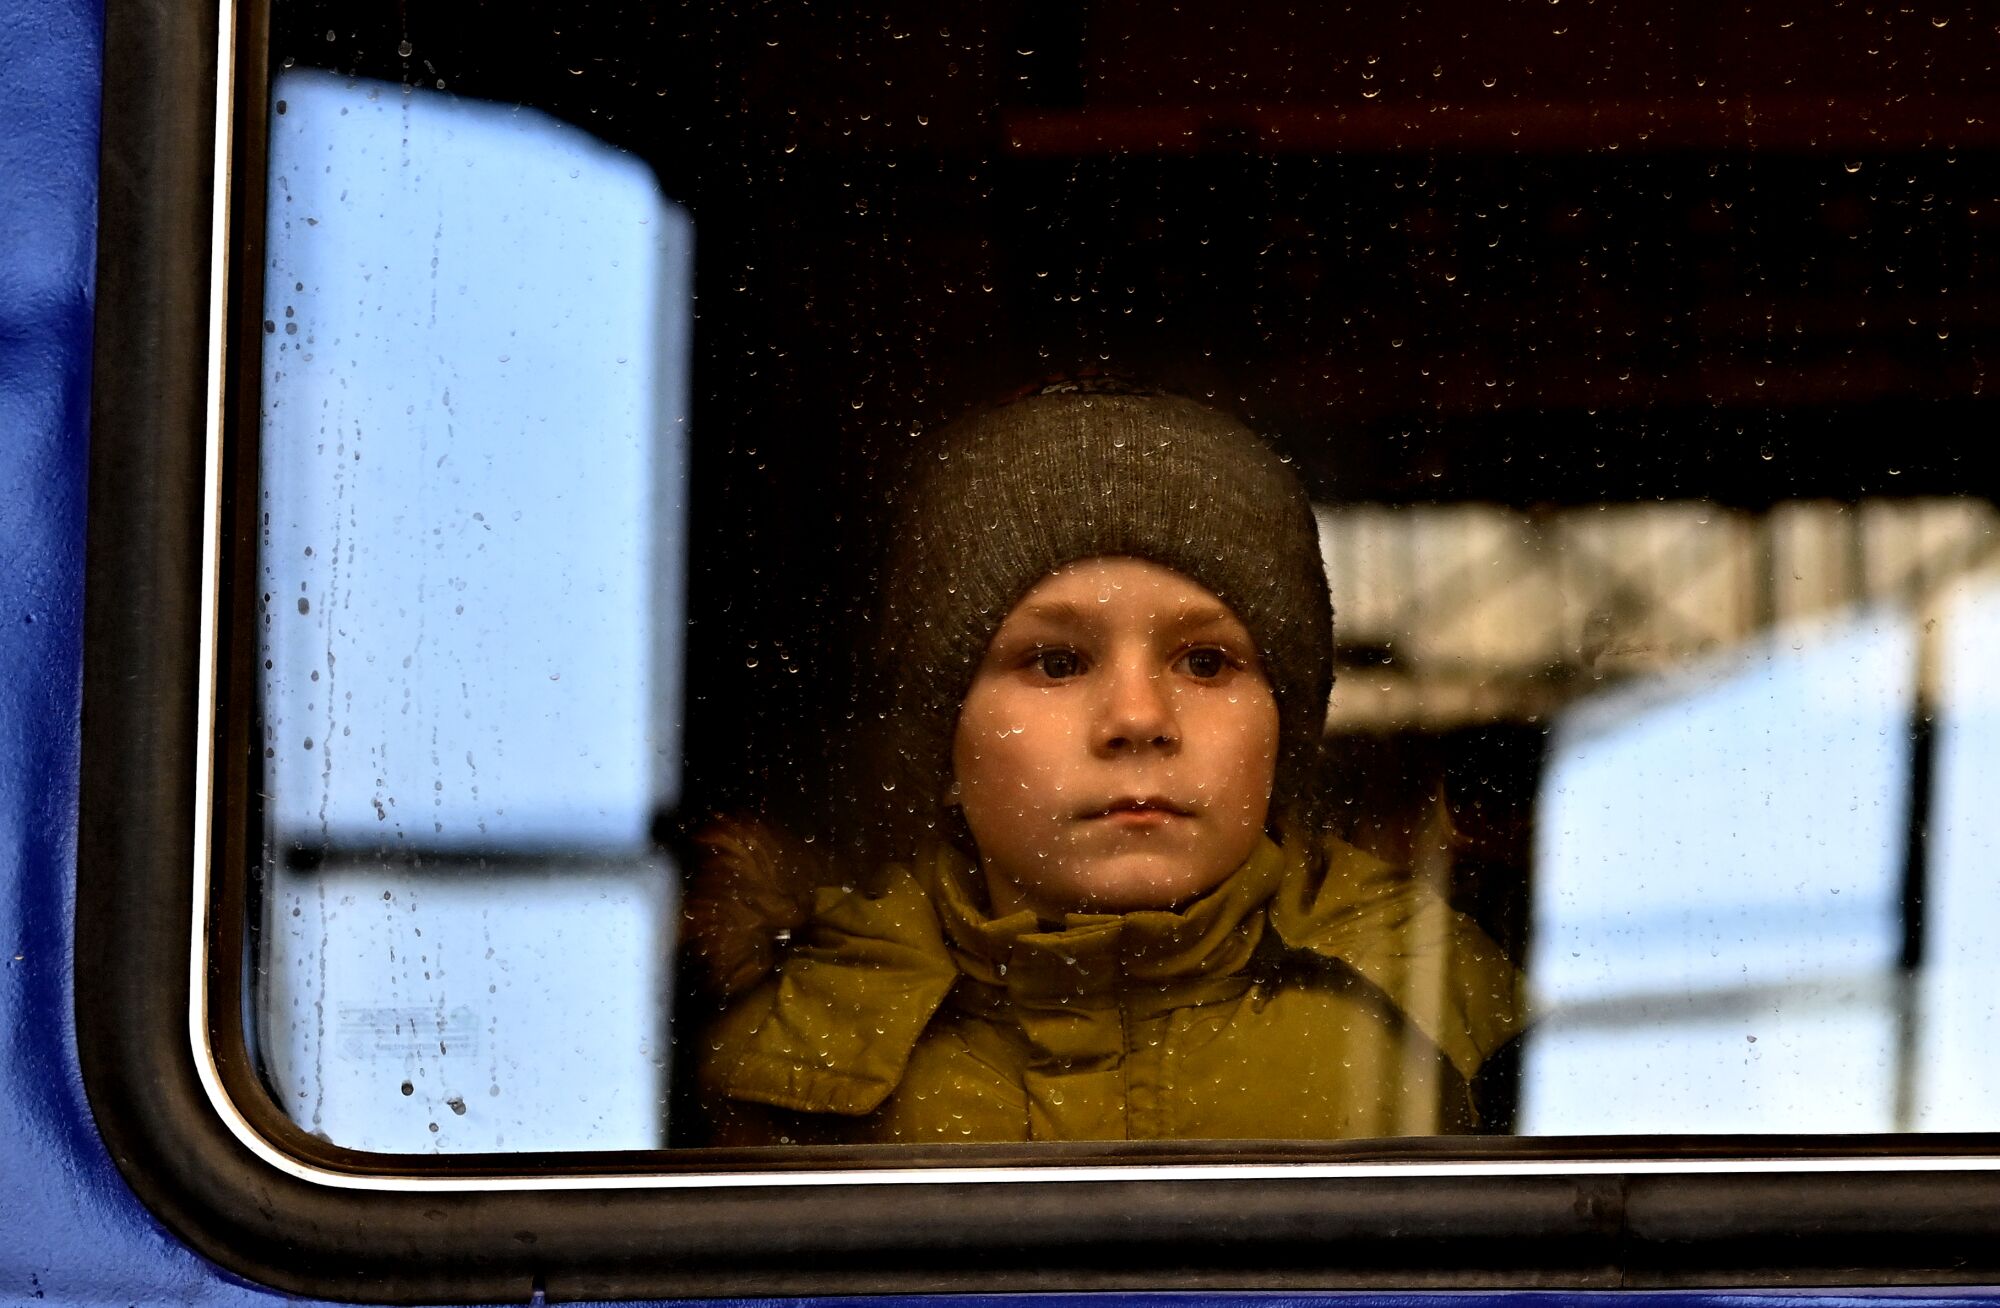 A child in a hat looks out a window 